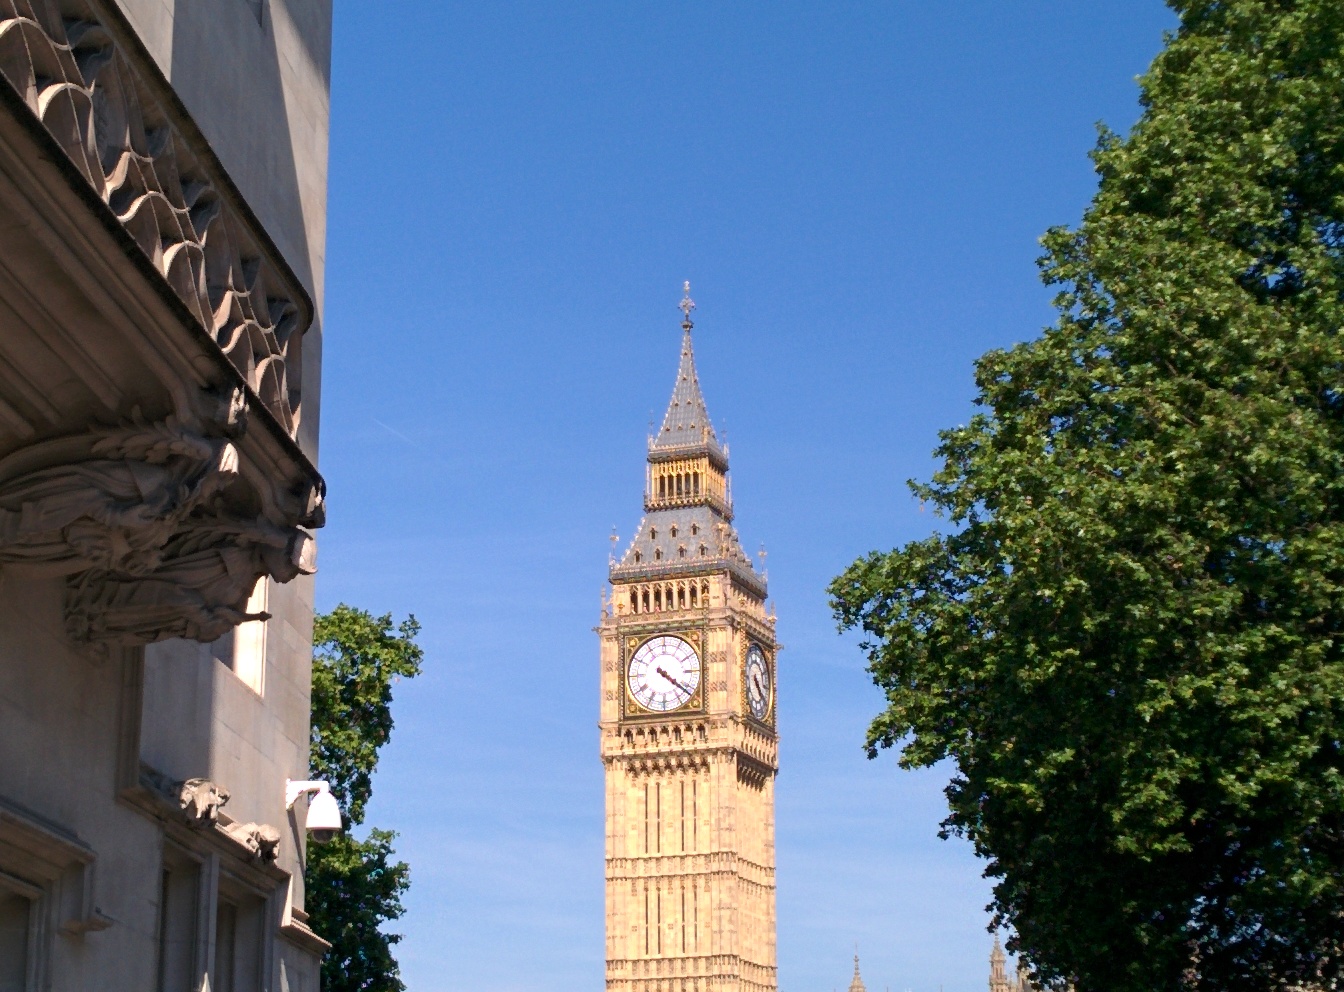 The Elizabeth Tower, housing the bell known as Big Ben, stands between a grey stone building and trees against a blue sky (Photo by Jock Busuttil / Product People Limited)